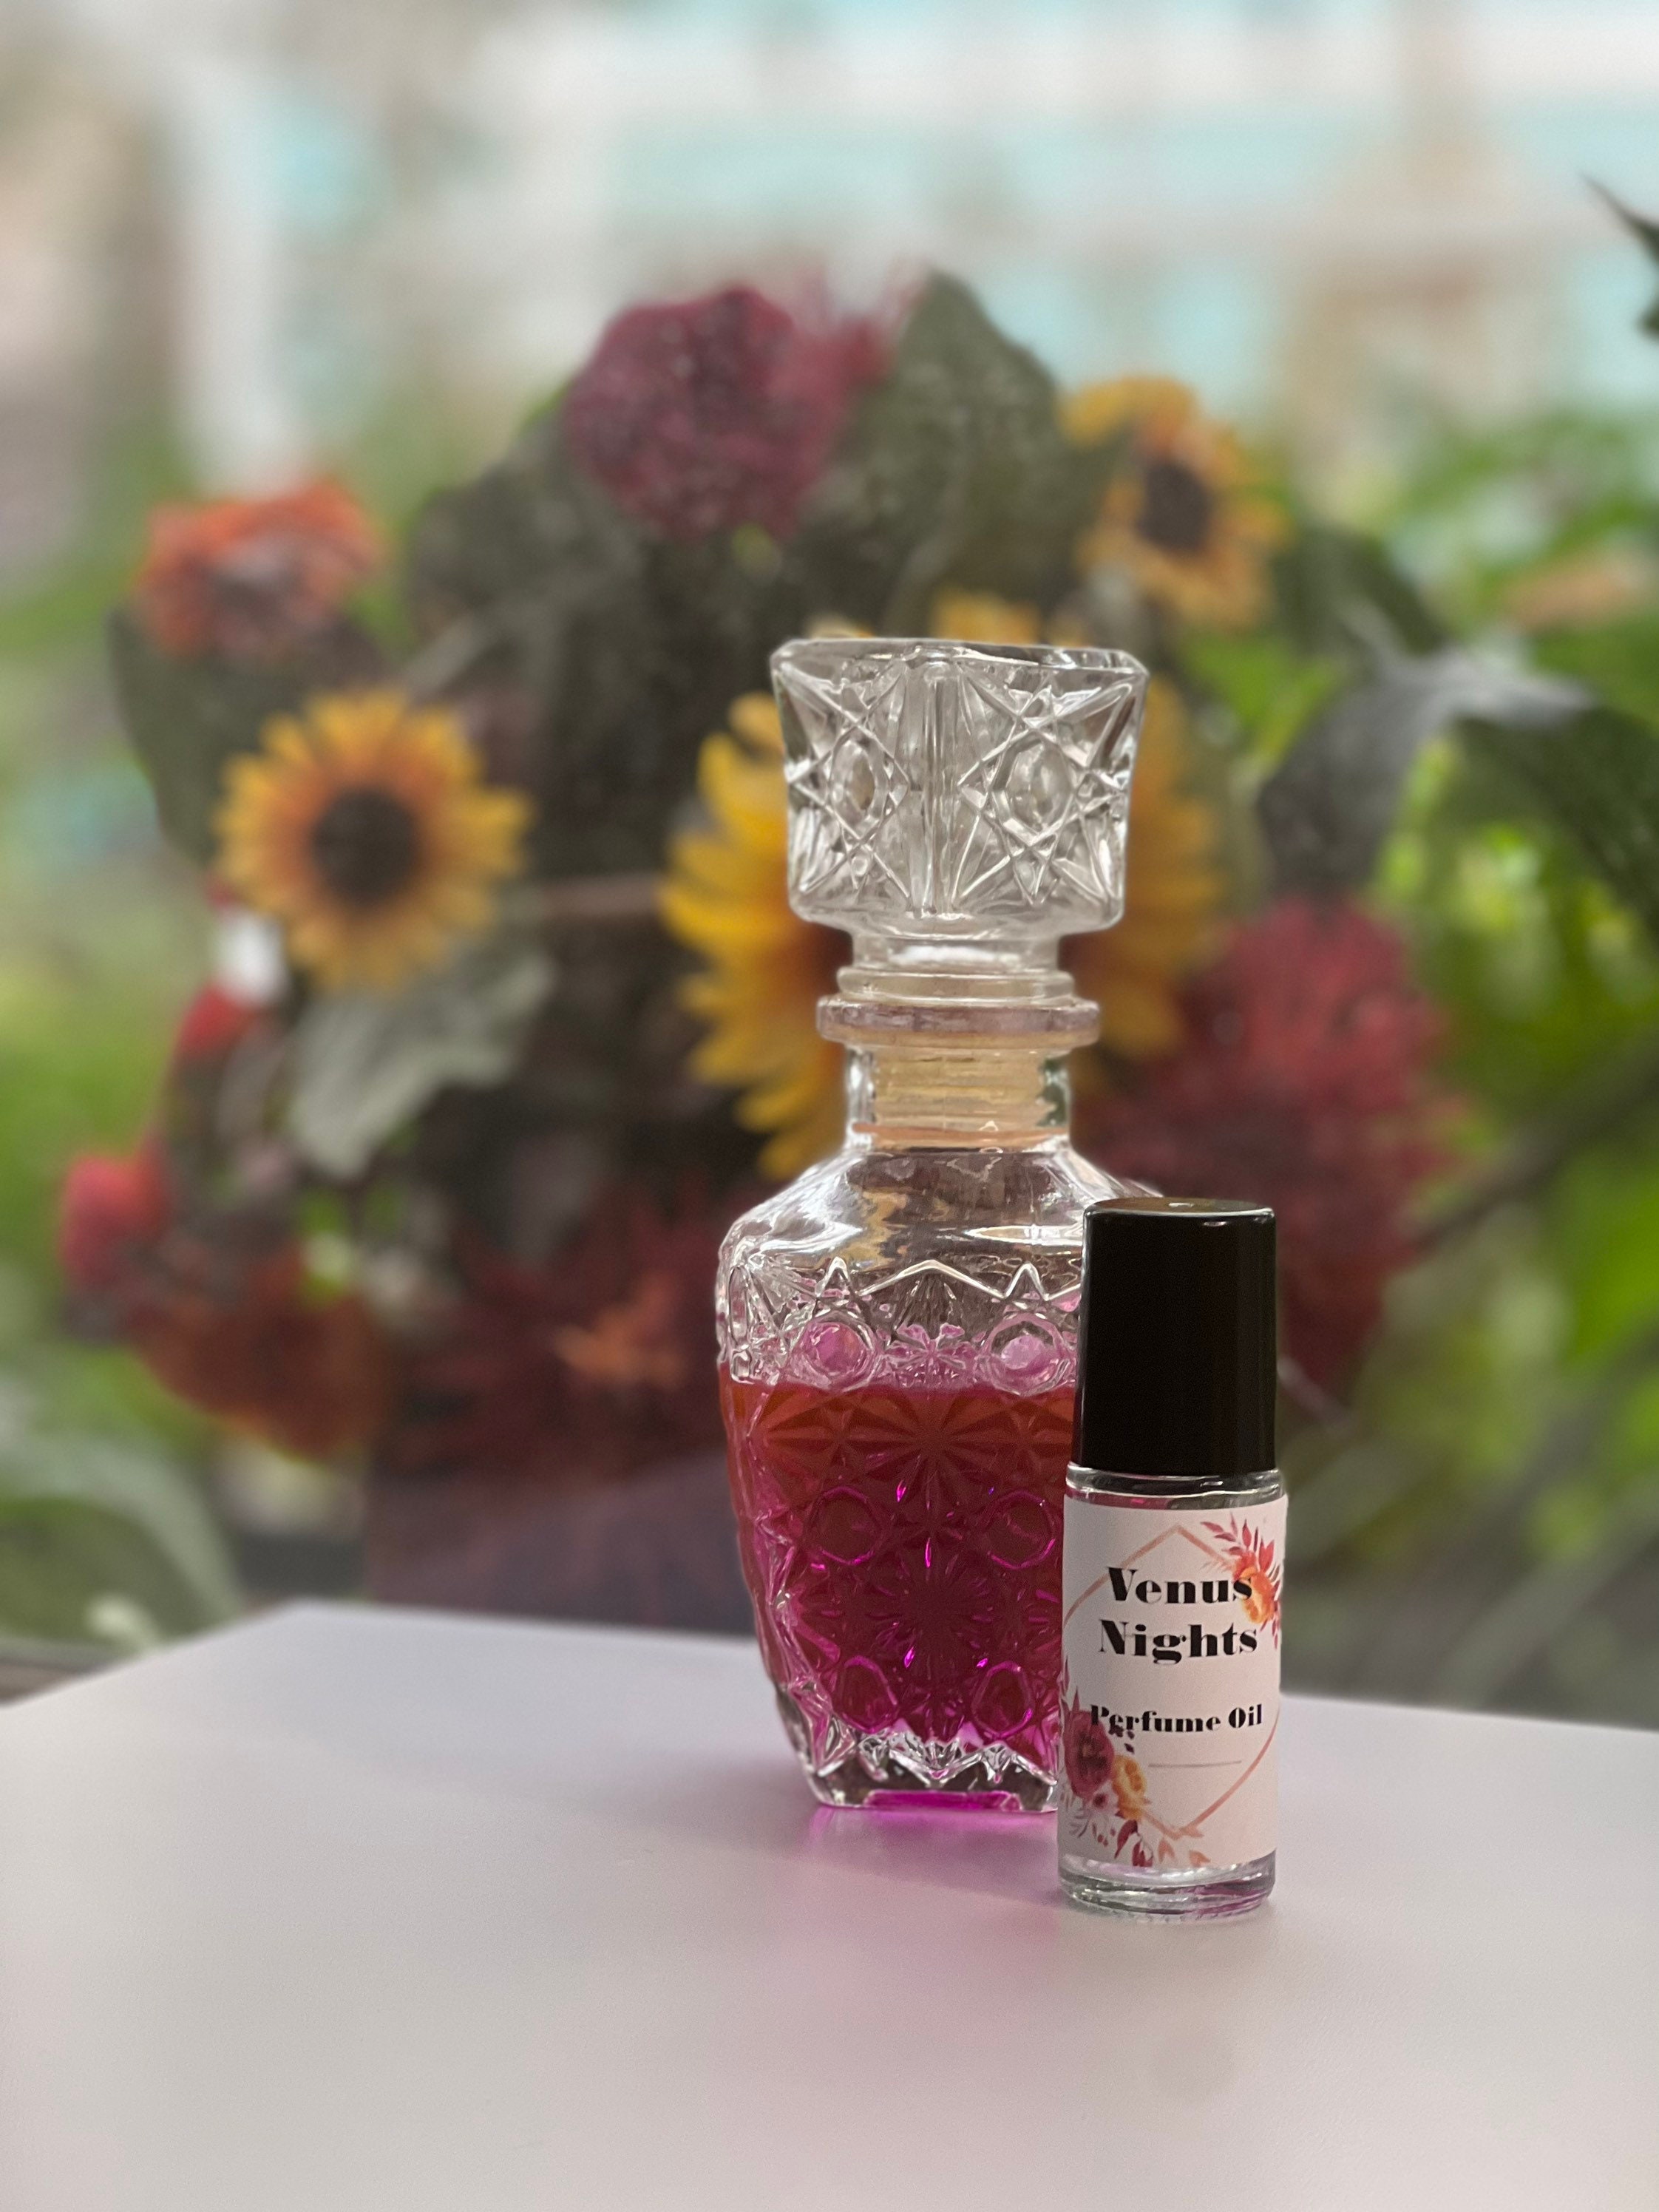 Freesia Perfume Oil Fragrance Scent Roll on Vegan Spring Floral Cologne  Scented Skin Body Aroma Aromatherapy Paraben-free Berrysweet Stuff 